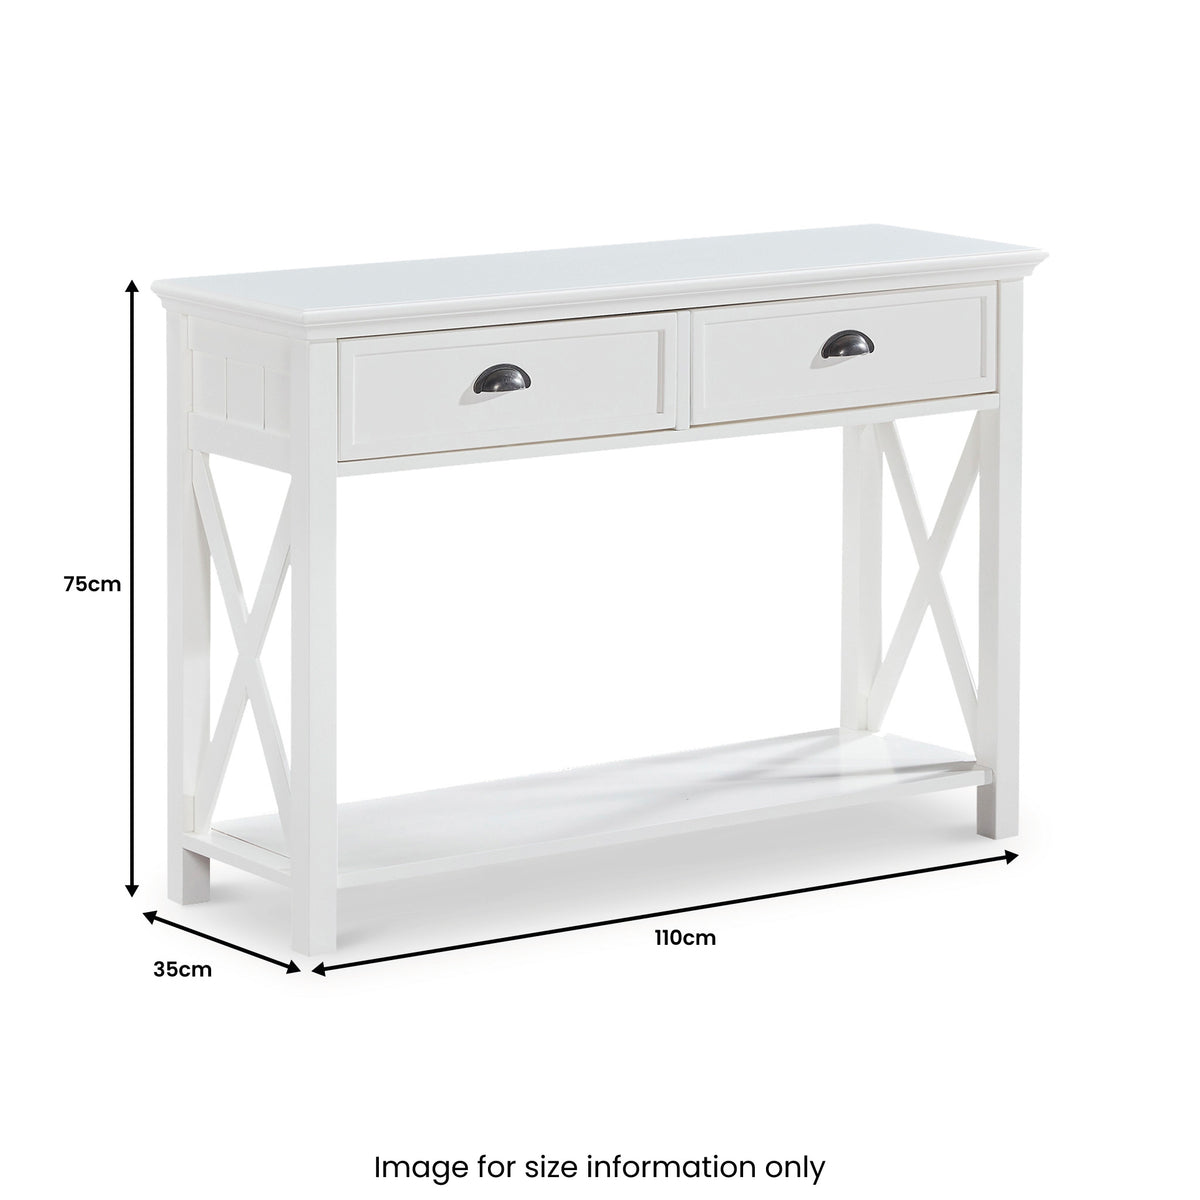 Leighton 2 Drawer Console Table dimensions